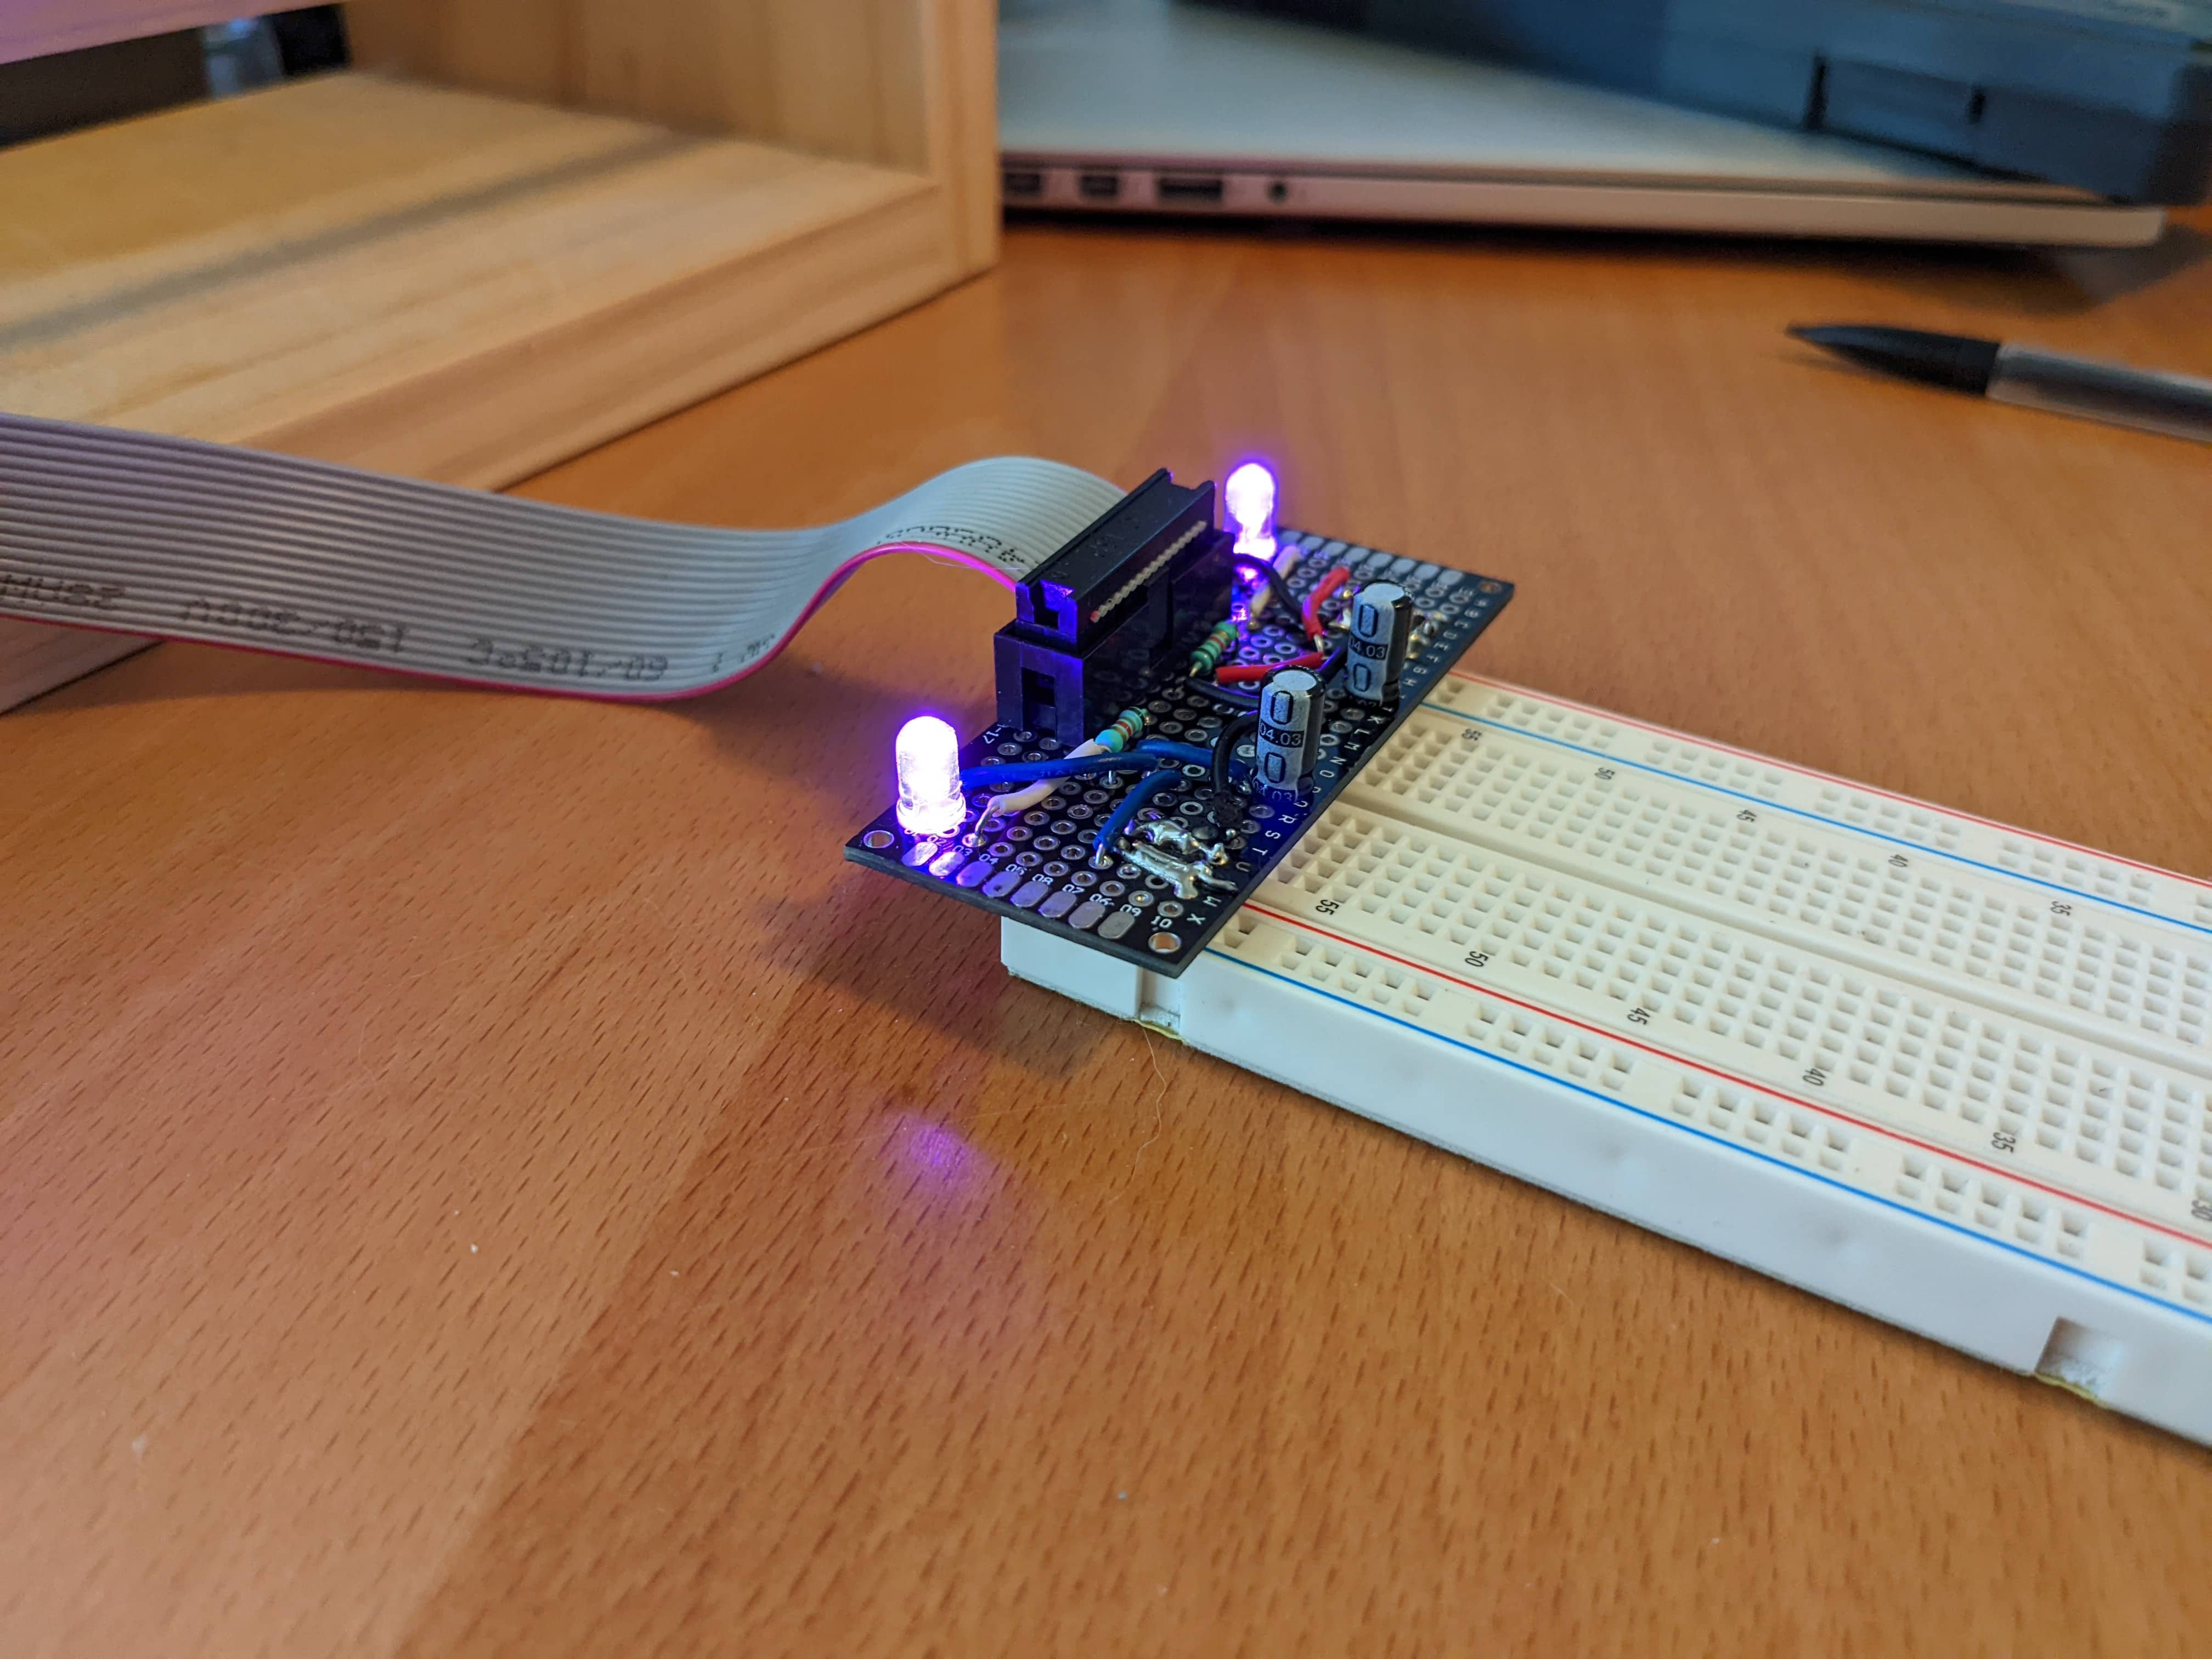 The Eurorack Breadboard Power module attached to a breadboard